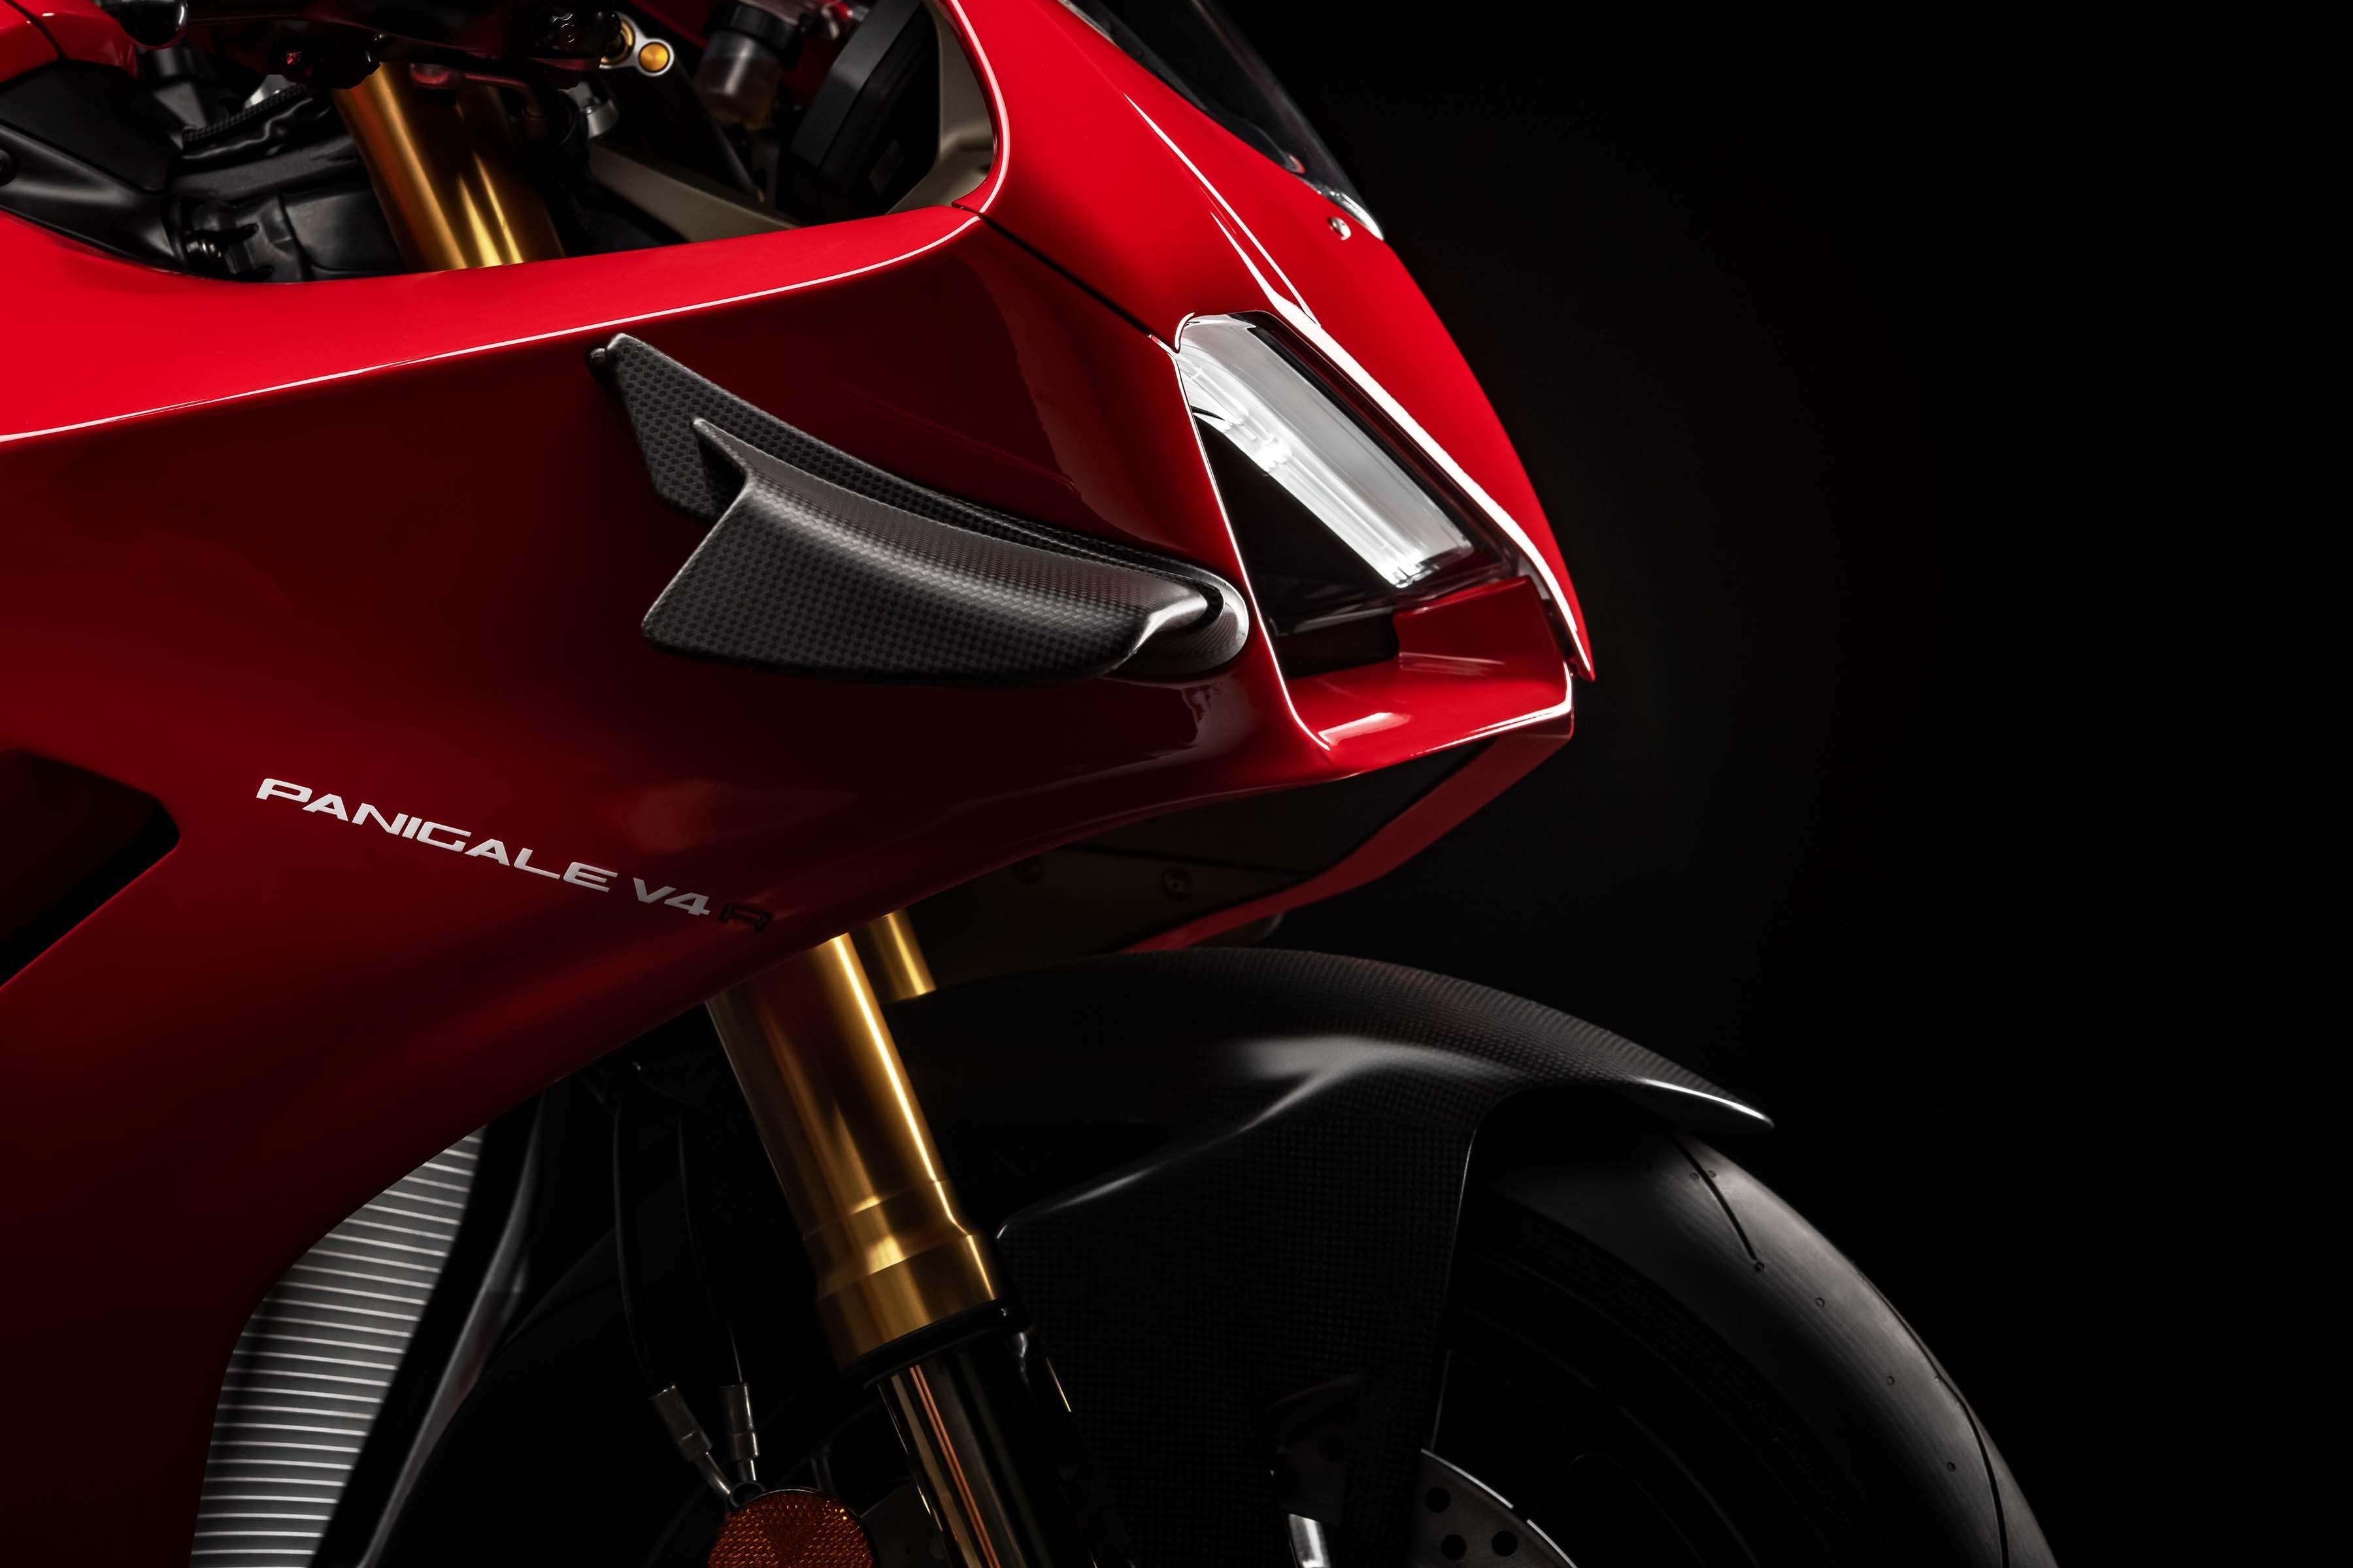 Ducati Panigale V4 R Debuts with 217hp, Wings, & More & Rubber